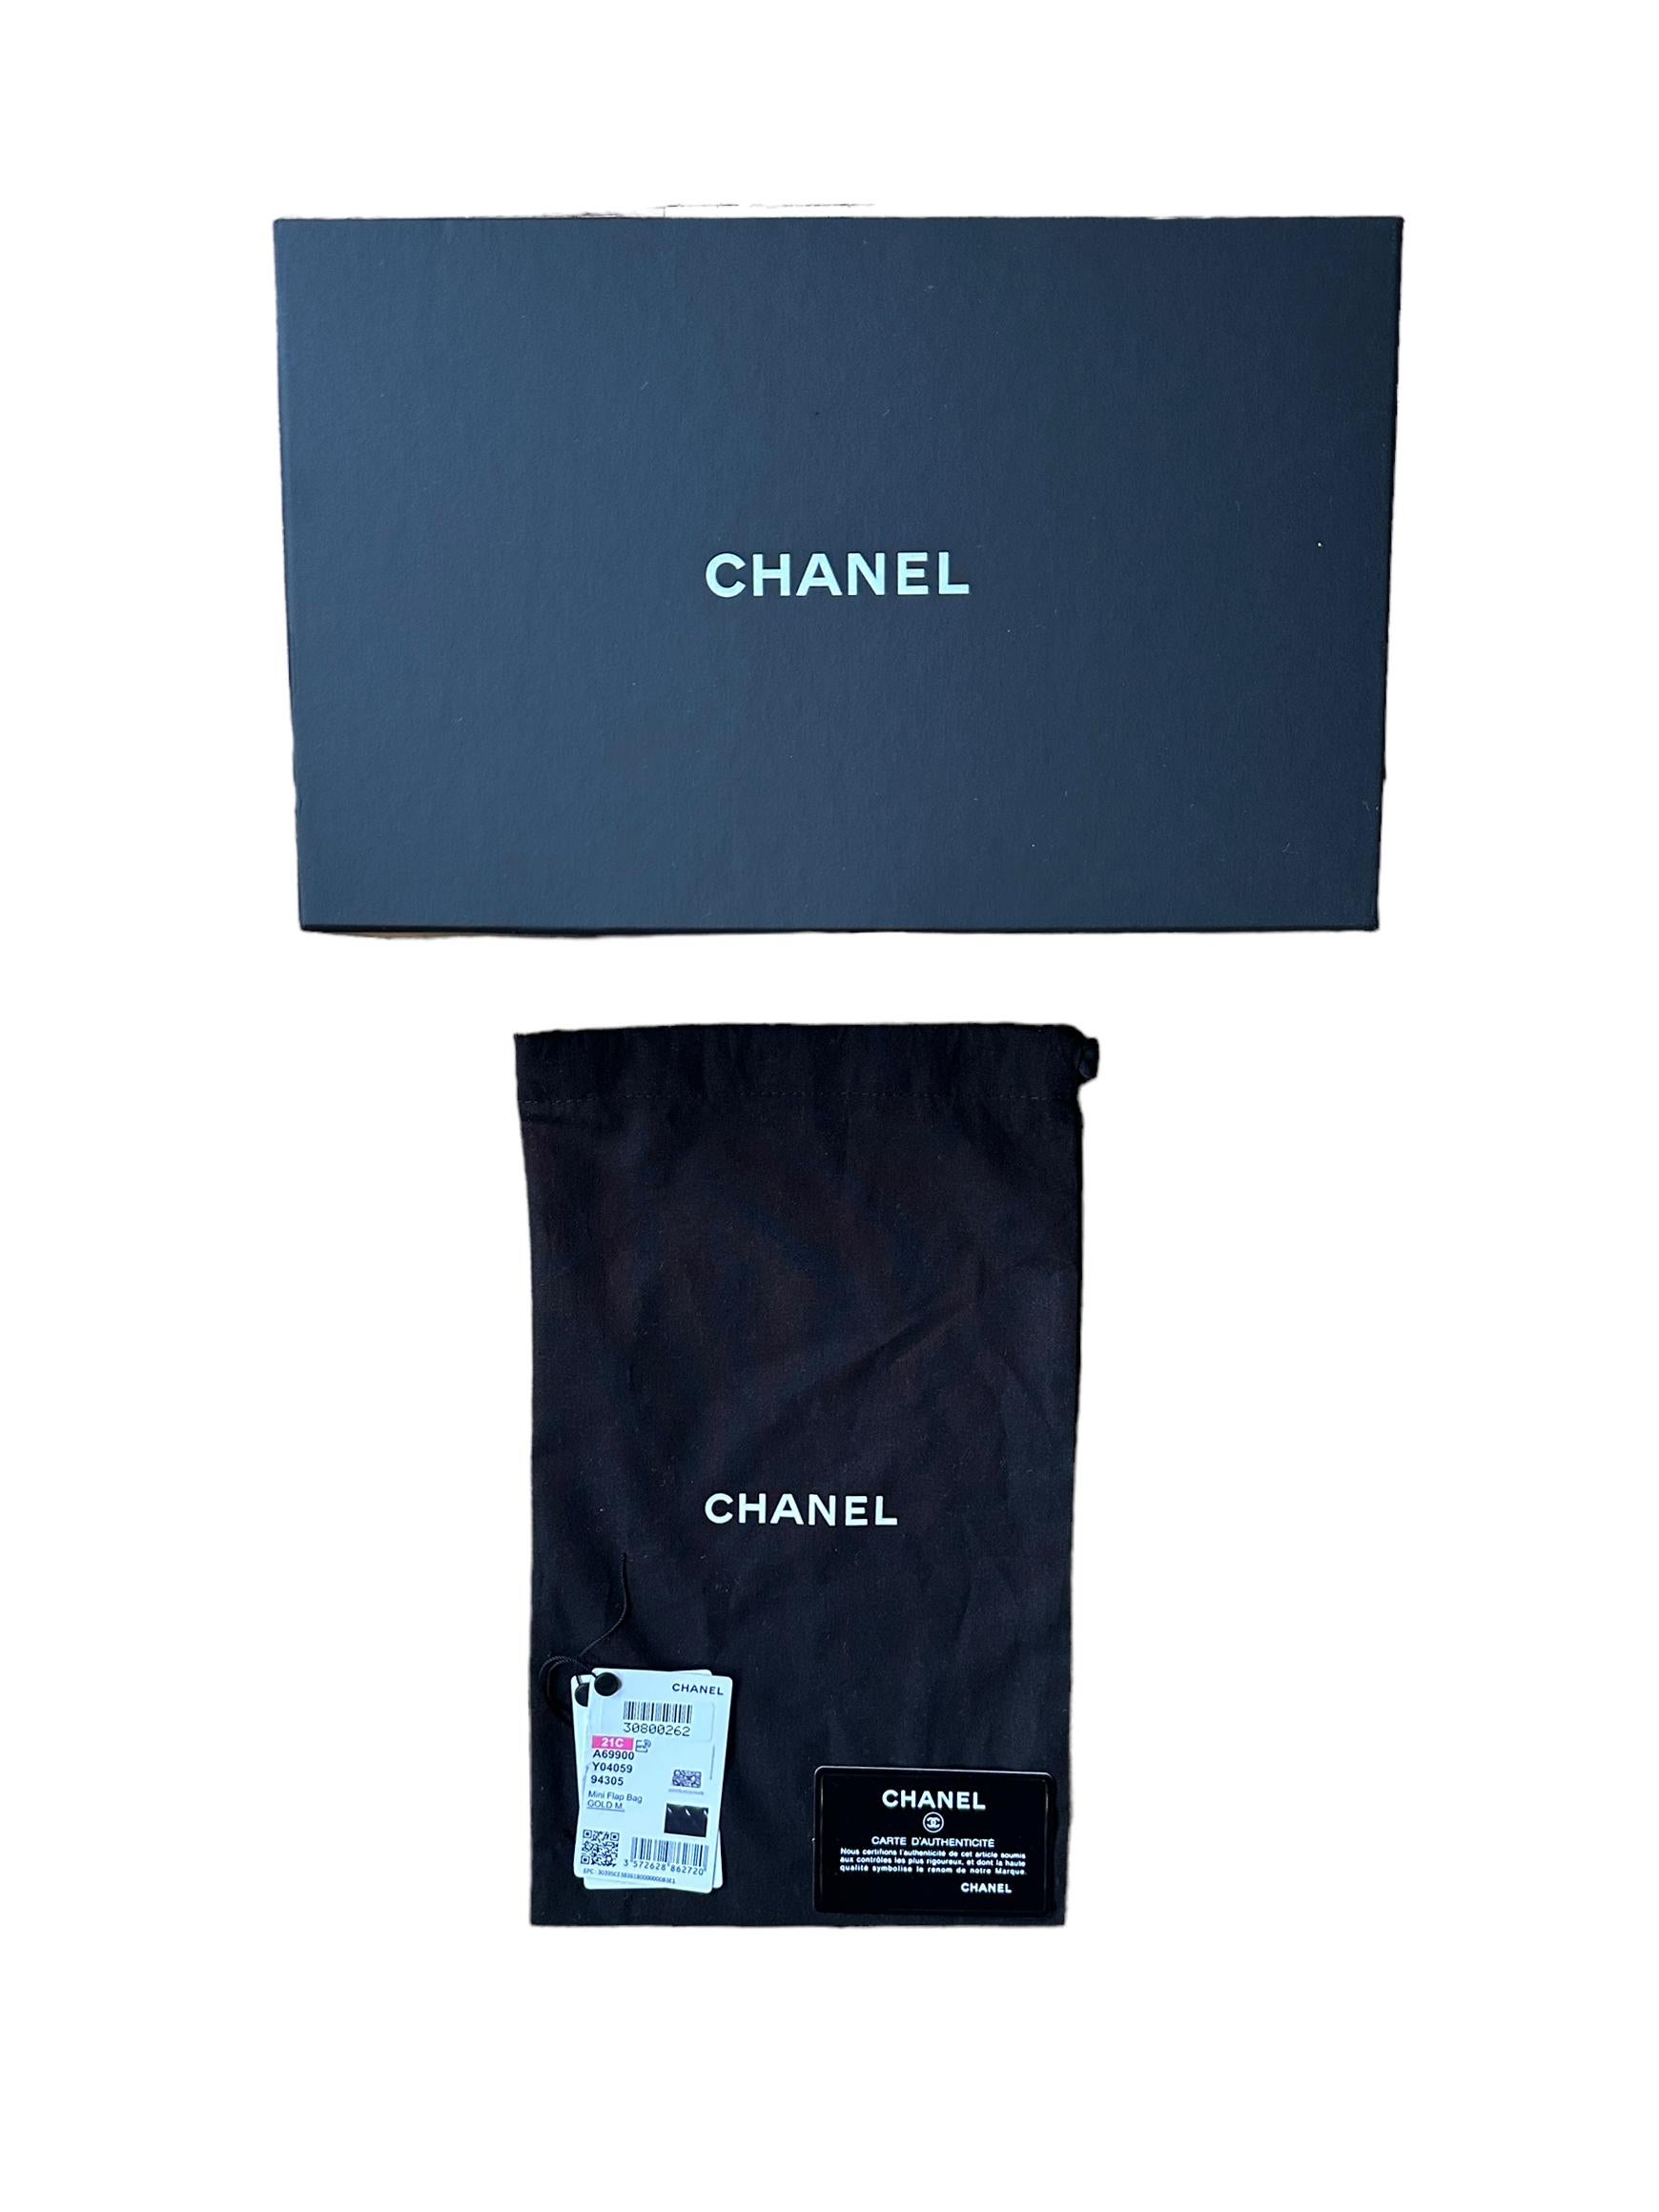 Chanel Black Lambskin Quilted Rectangular Mini Flap Bag

Made In: France
Year of Production: 2021
Color: Black
Hardware: Goldtone
Materials: Lambskin leather
Lining: Smooth leather
Closure/Opening: Flap top with CC twist lock
Exterior Pockets: One